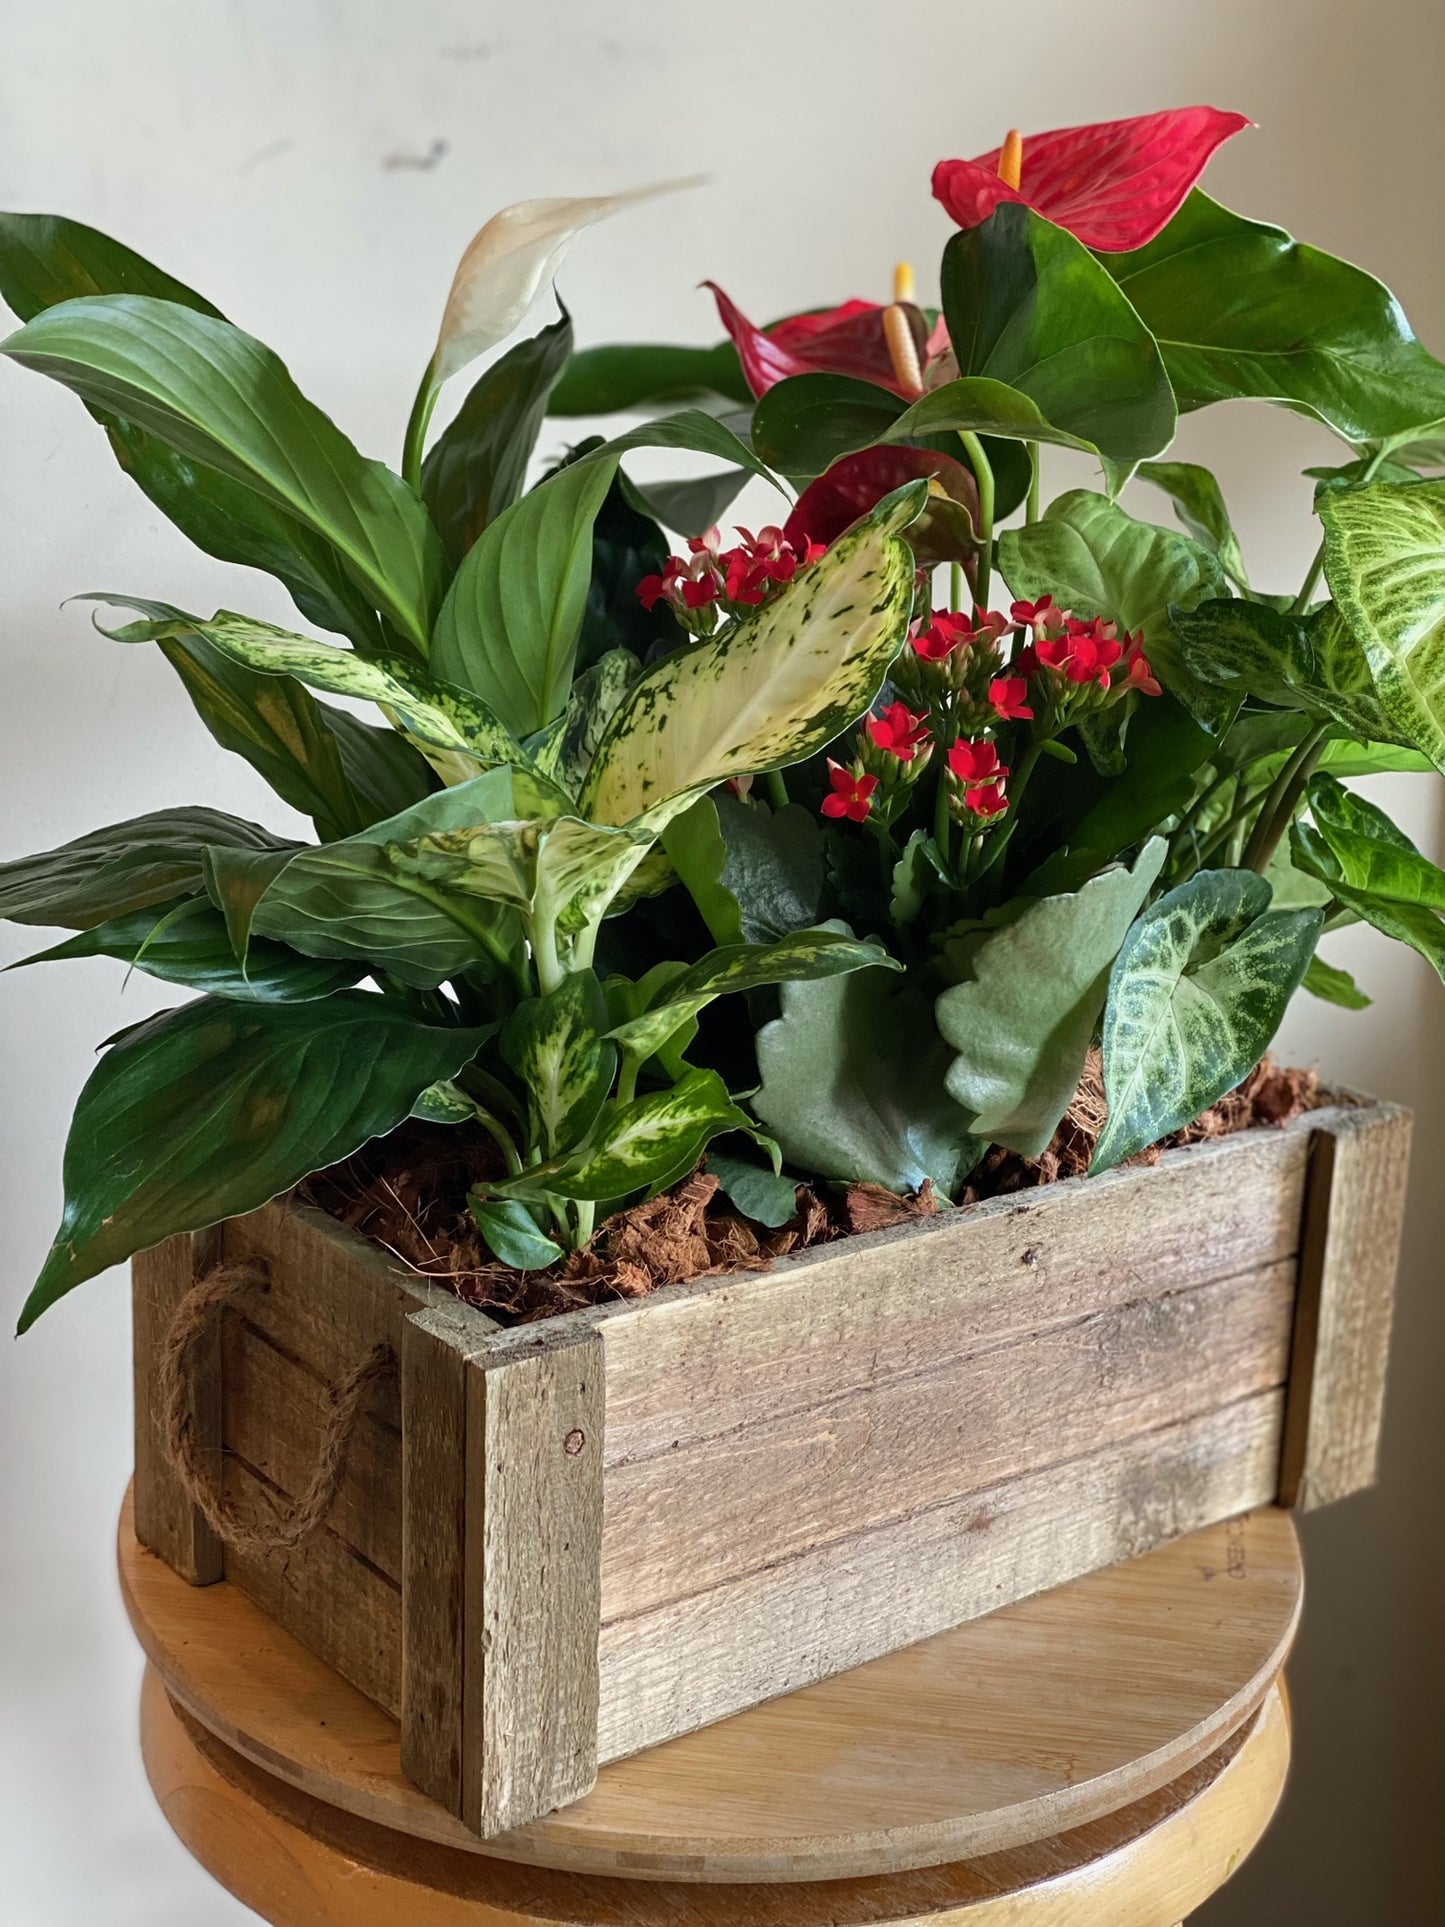 Rustic Wood Box Planter with Tropical Plants